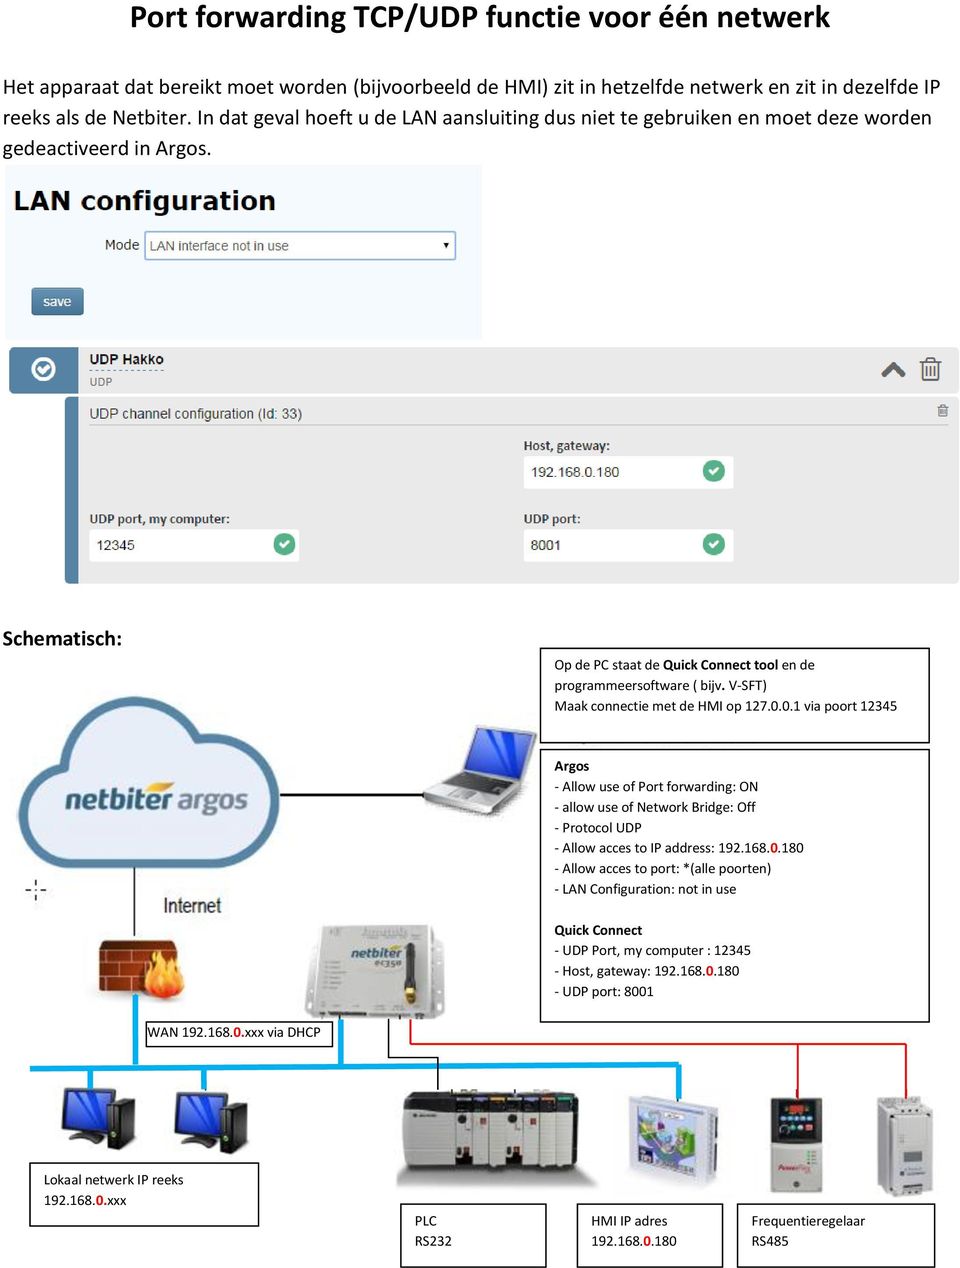 V-SFT) Maak connectie met de HMI op 127.0.0.1 via poort 12345 Argos - Allow use of Port forwarding: ON - allow use of Network Bridge: Off - Protocol UDP - Allow acces to IP address: 192.168.0.180 - Allow acces to port: *(alle poorten) - LAN Configuration: not in use Quick Connect - UDP Port, my computer : 12345 - Host, gateway: 192.